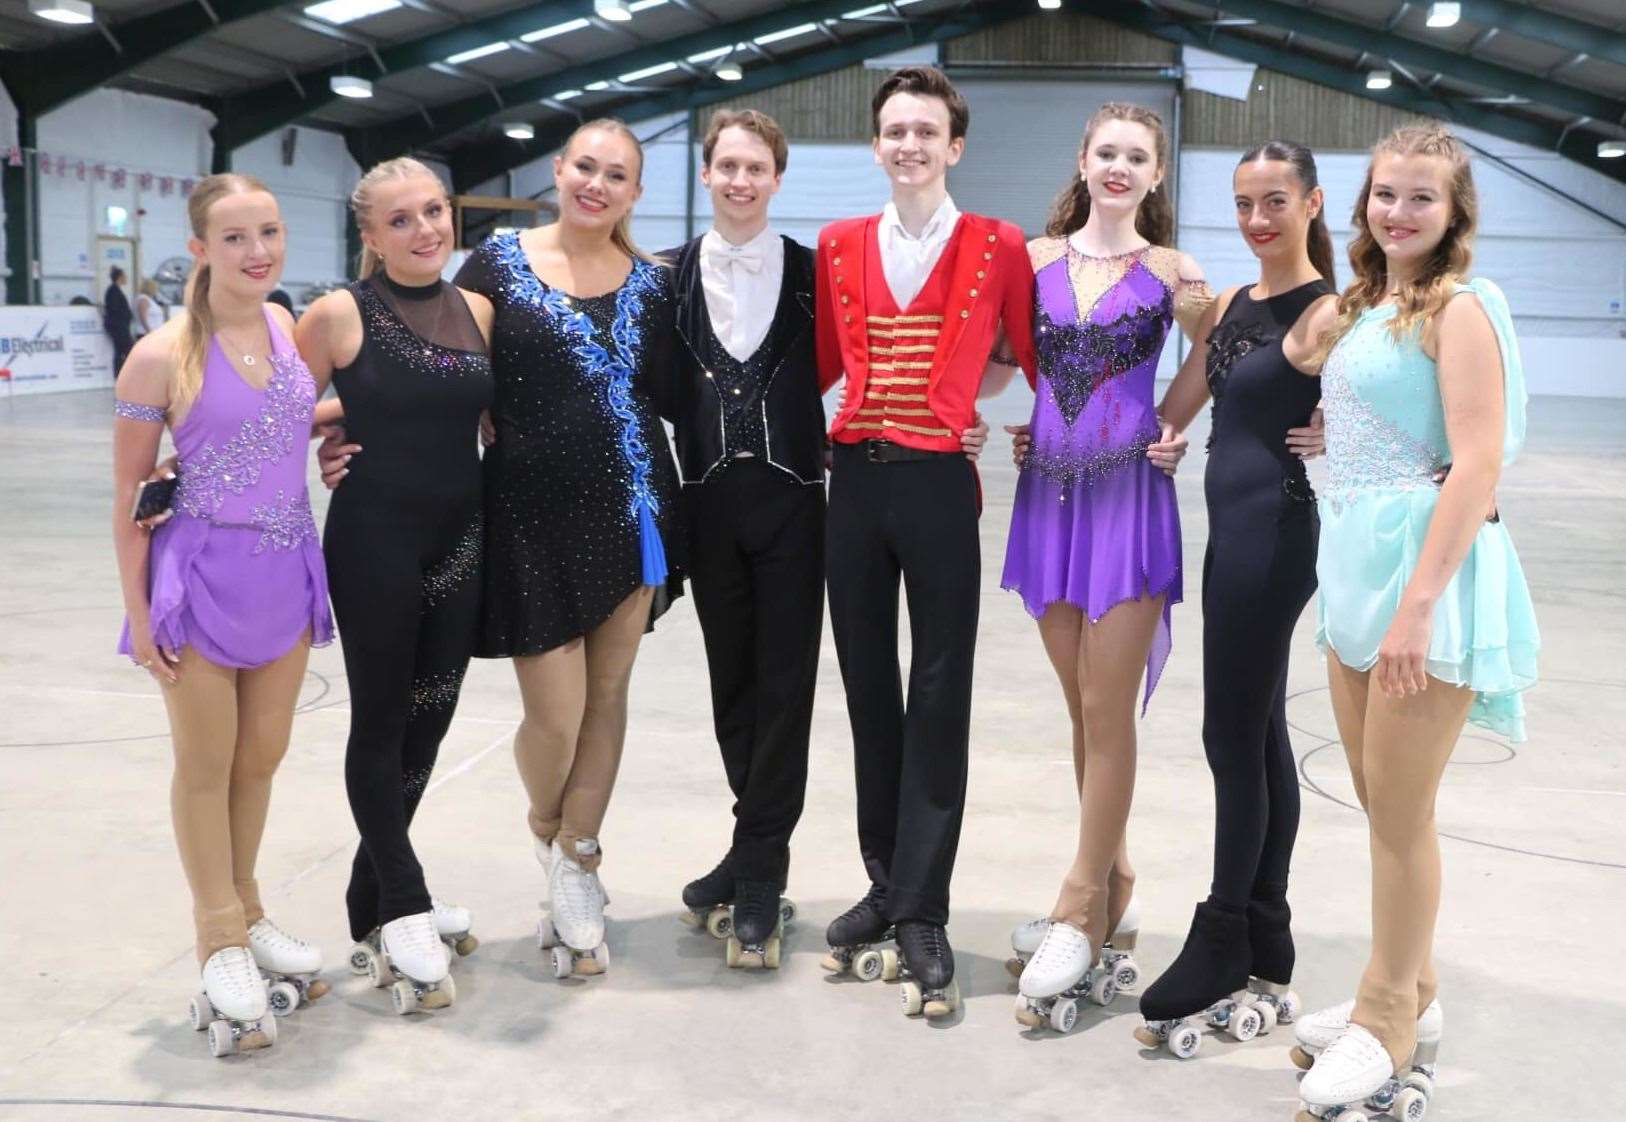 Maidstone Roller Dance Club members Katy Bray, Laura Donoghue, Ella Donoghue, Zac Martin, Oliver Martin, Isabelle Jarvis, Lucy Aves and Anna Slokenburga